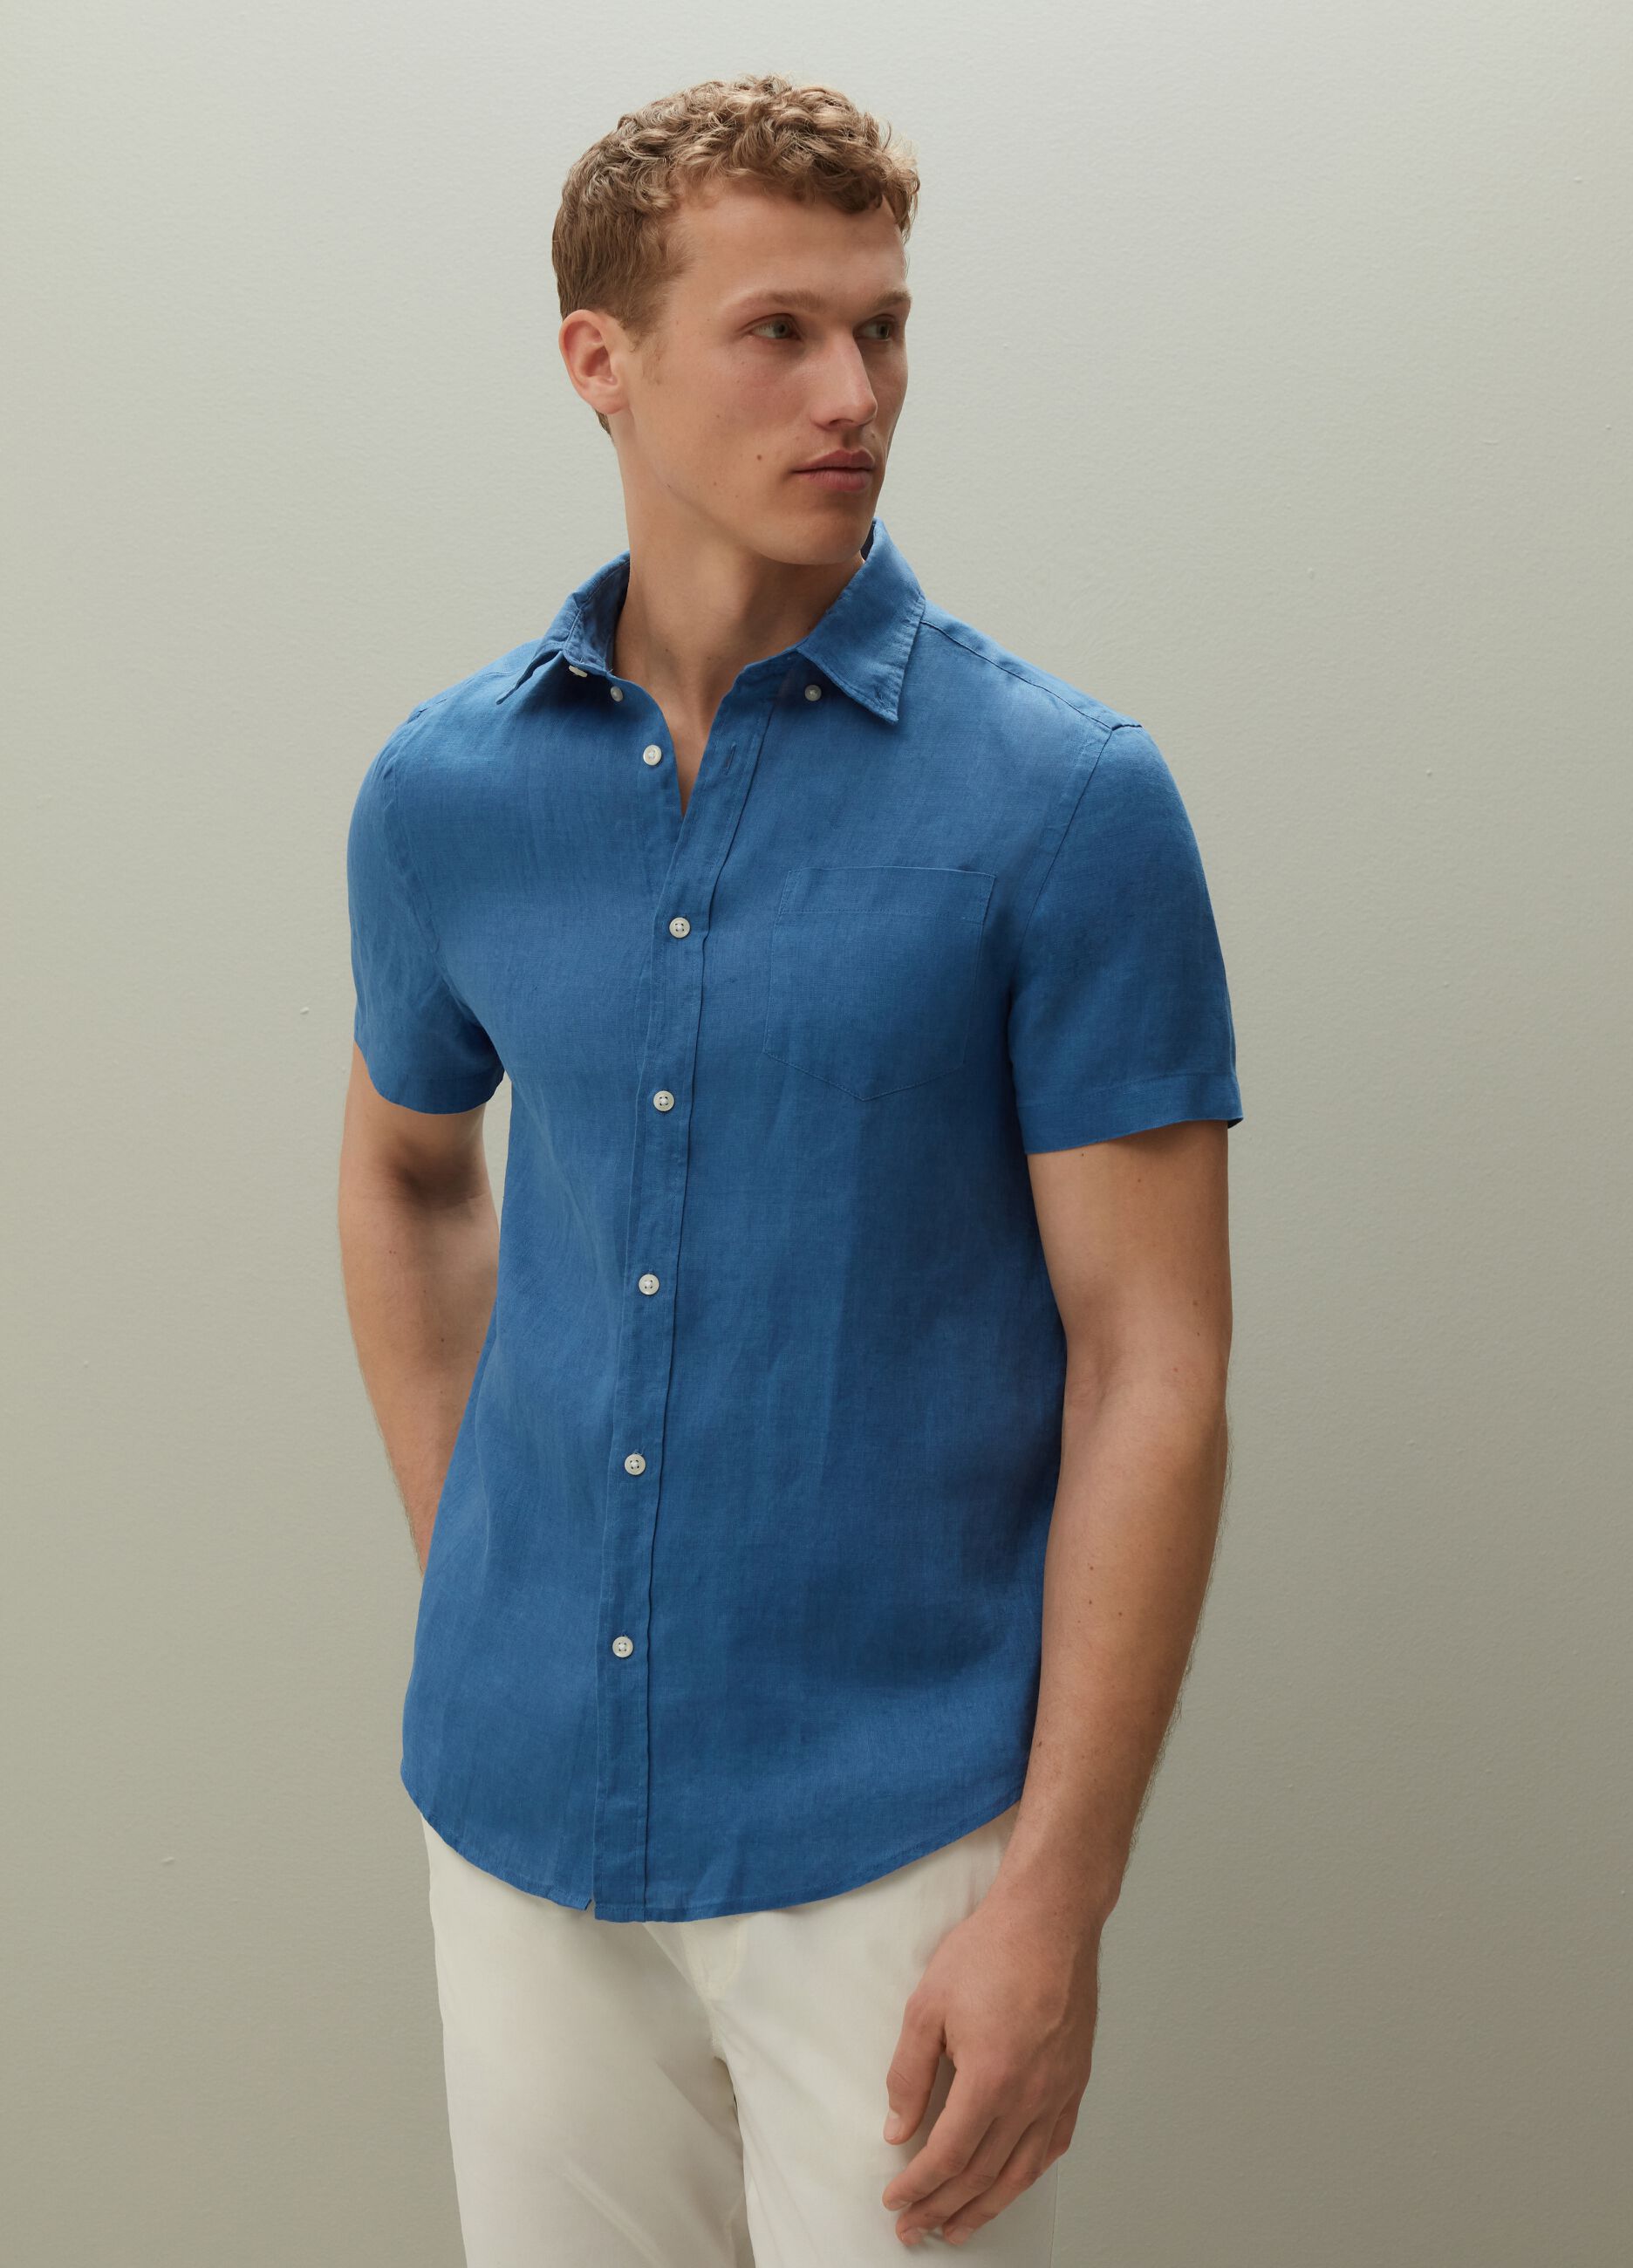 Linen shirt with short sleeves